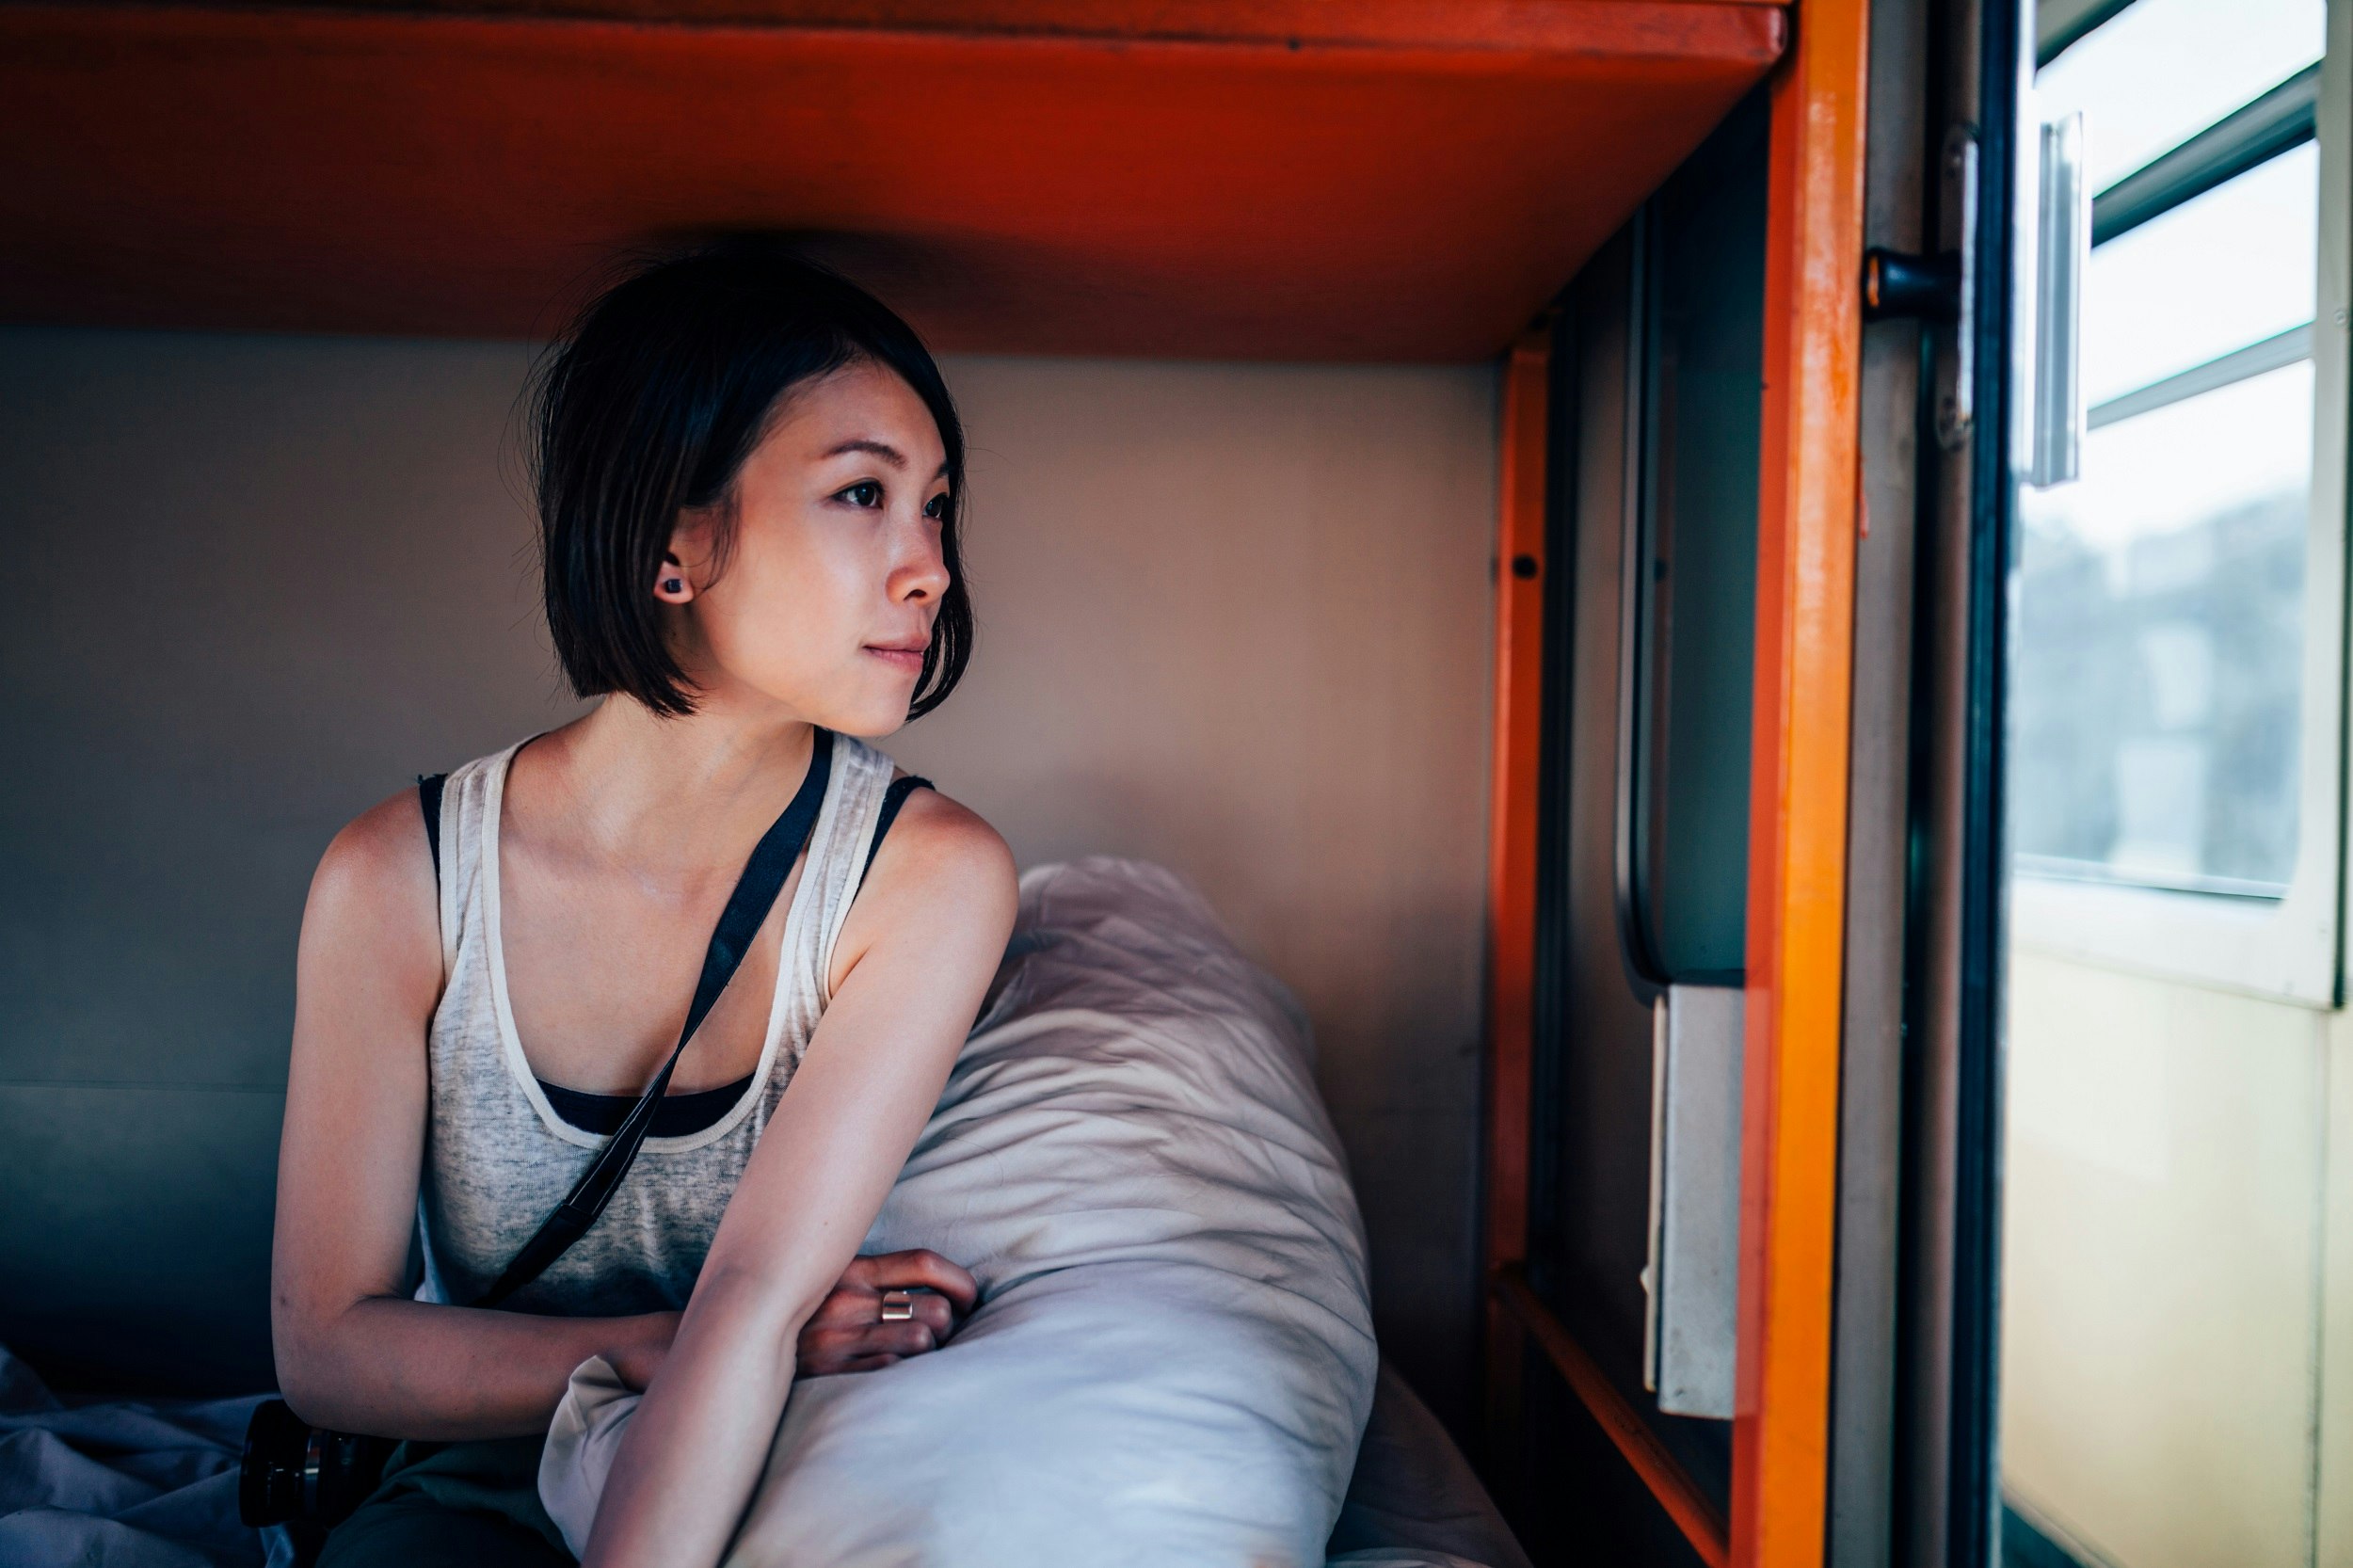 A woman sitting in bed on a sleeper train